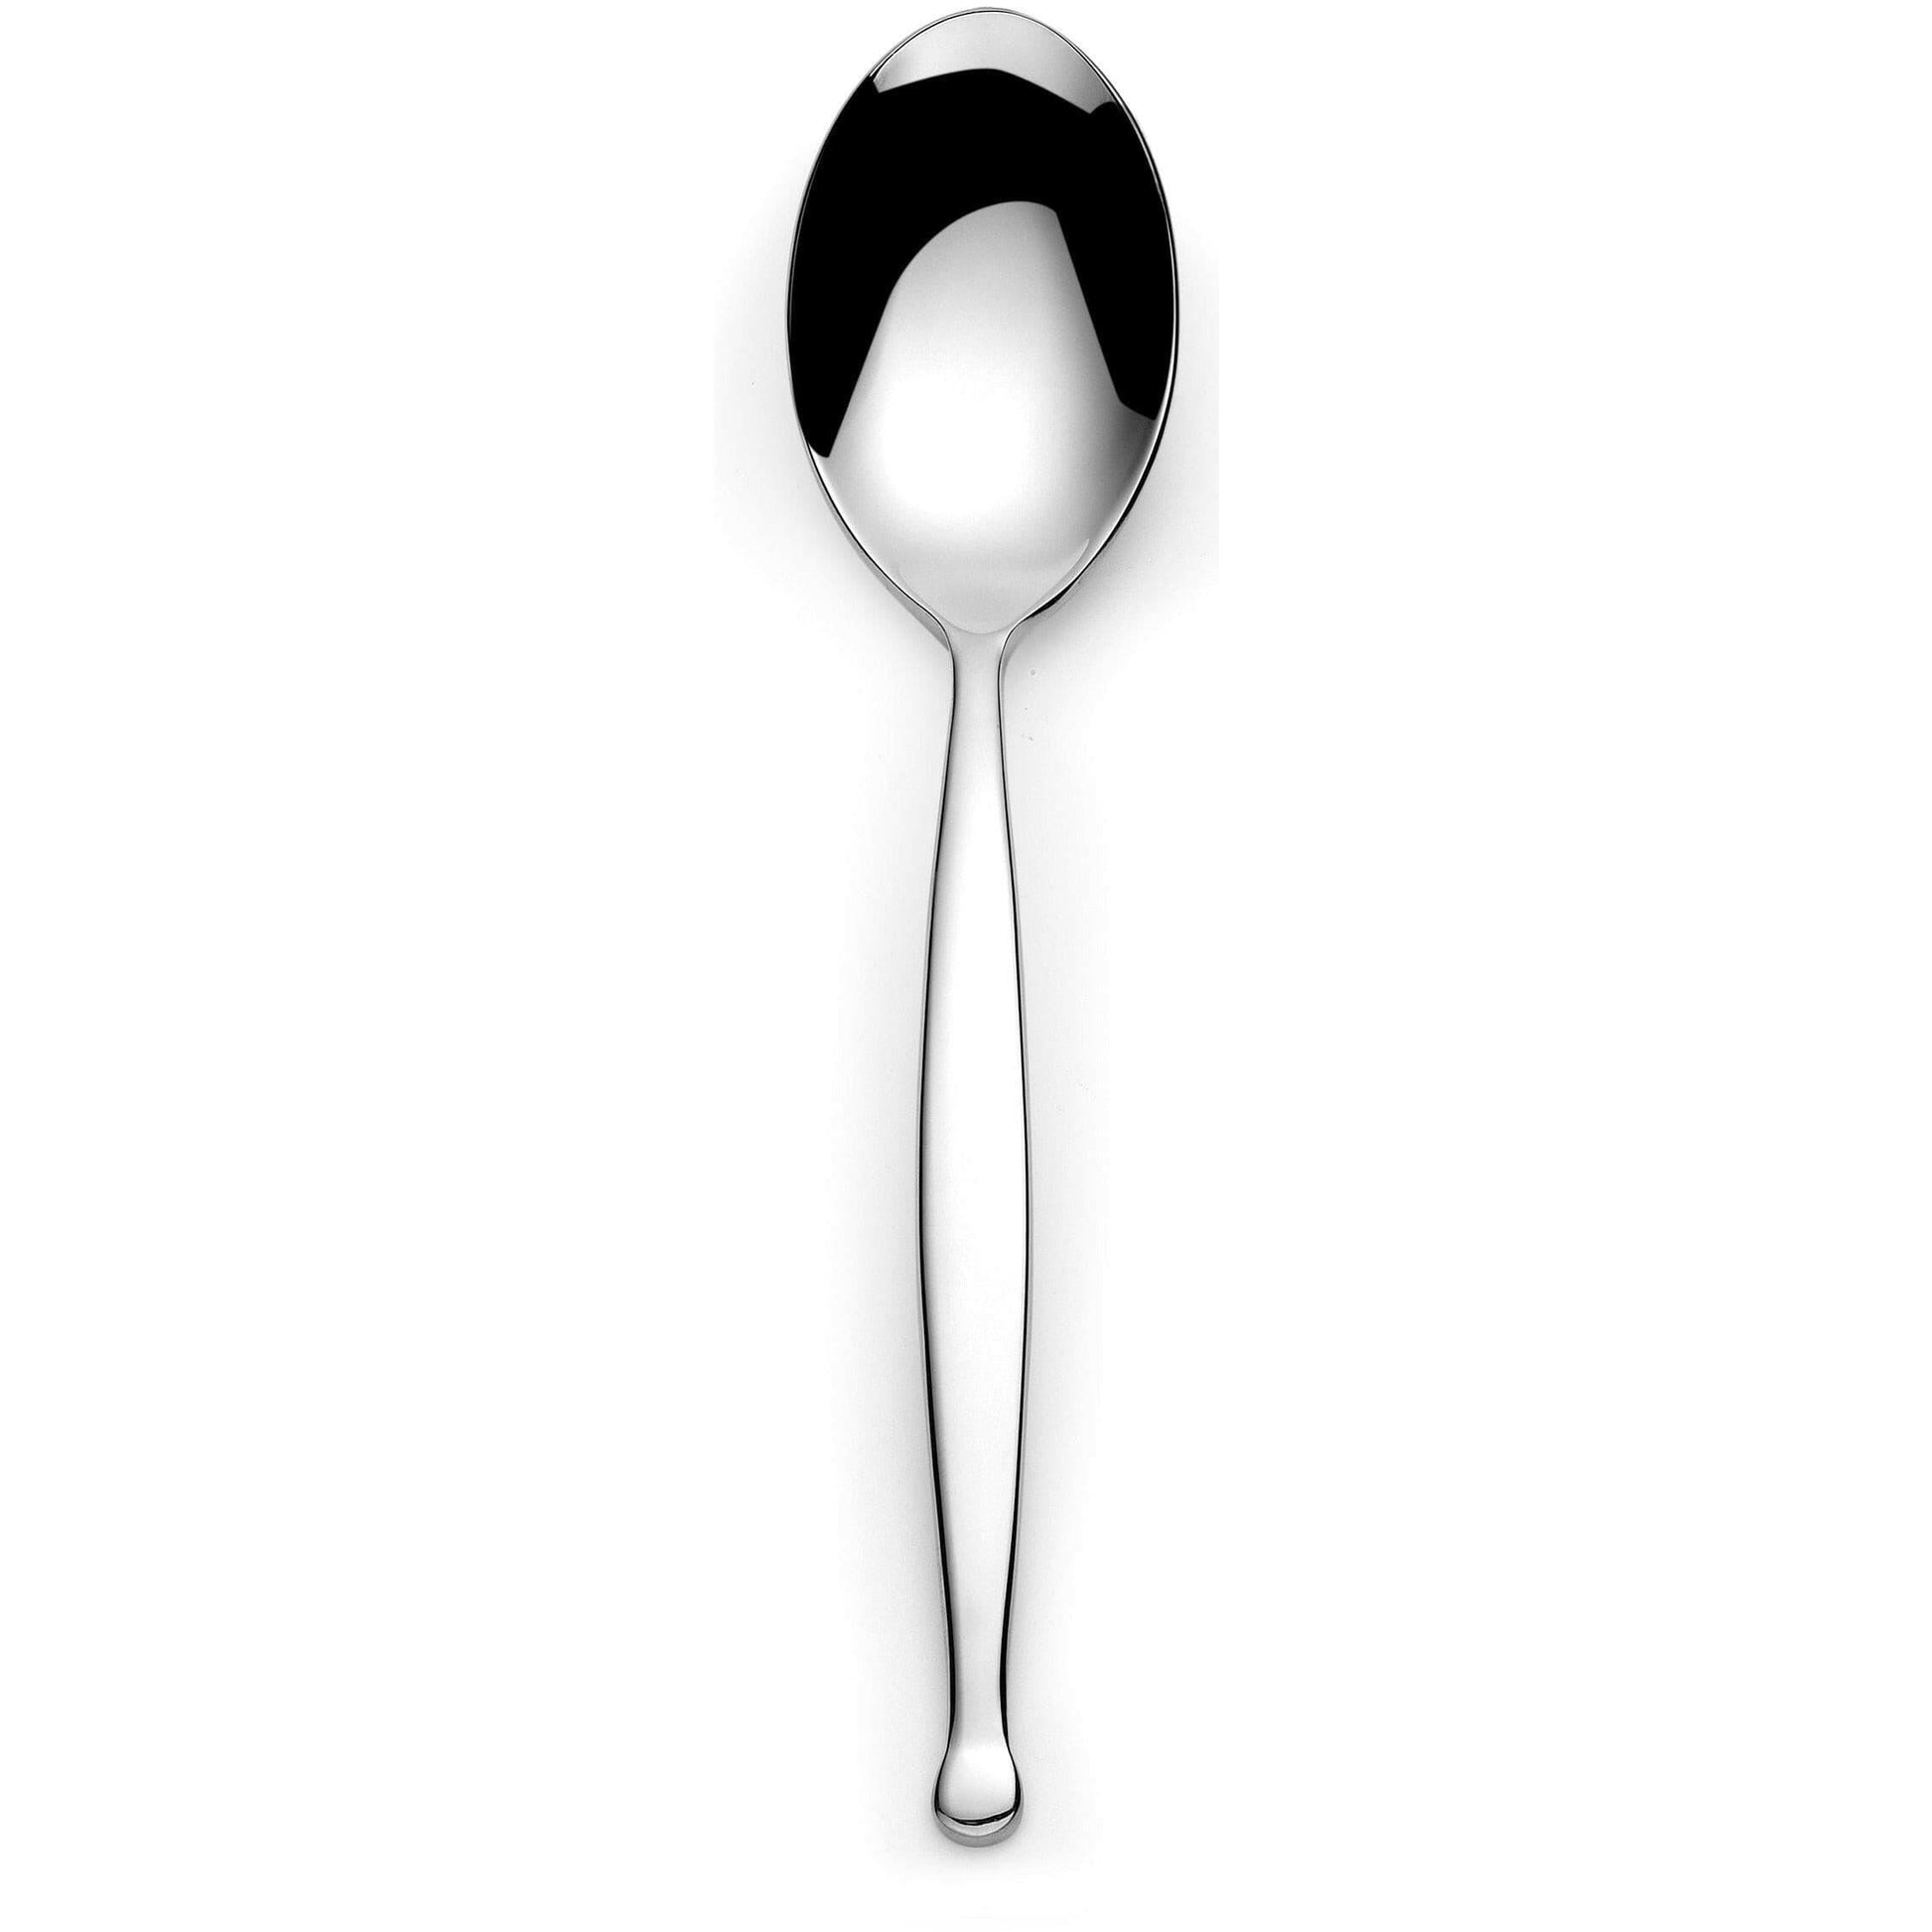 Elia Jester Table Spoon 18/10 Stainless Steel Case Size 12